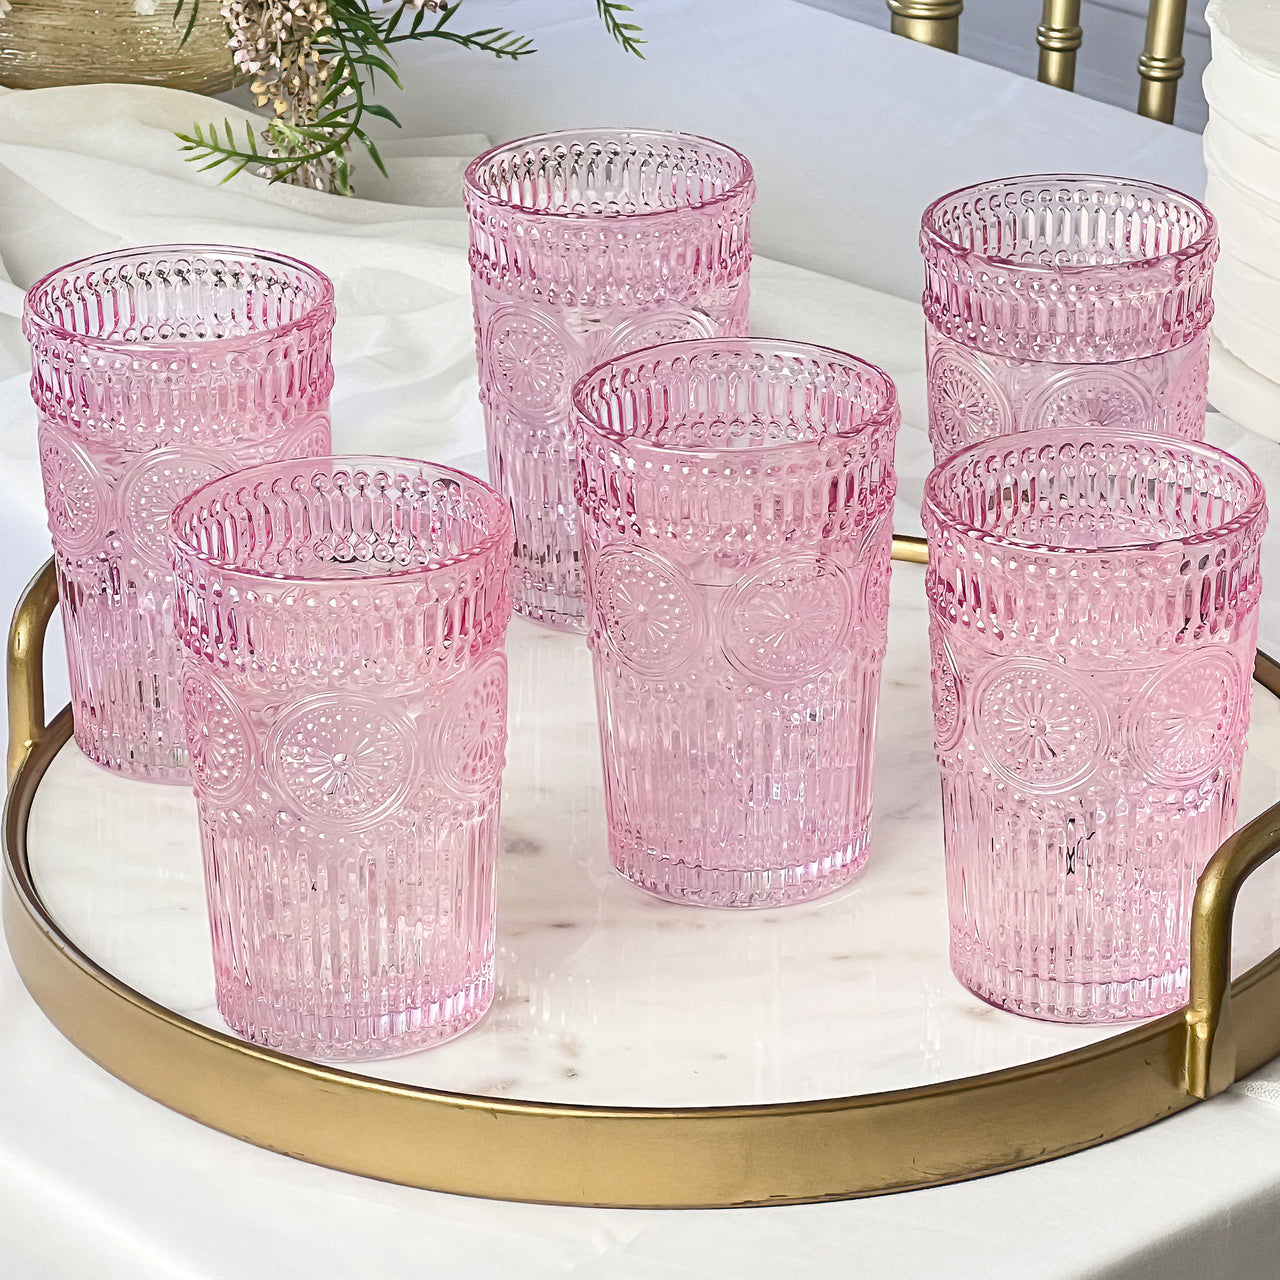 10 oz. Textured Beaded Clear Glass (Set of 6) by Kate Aspen